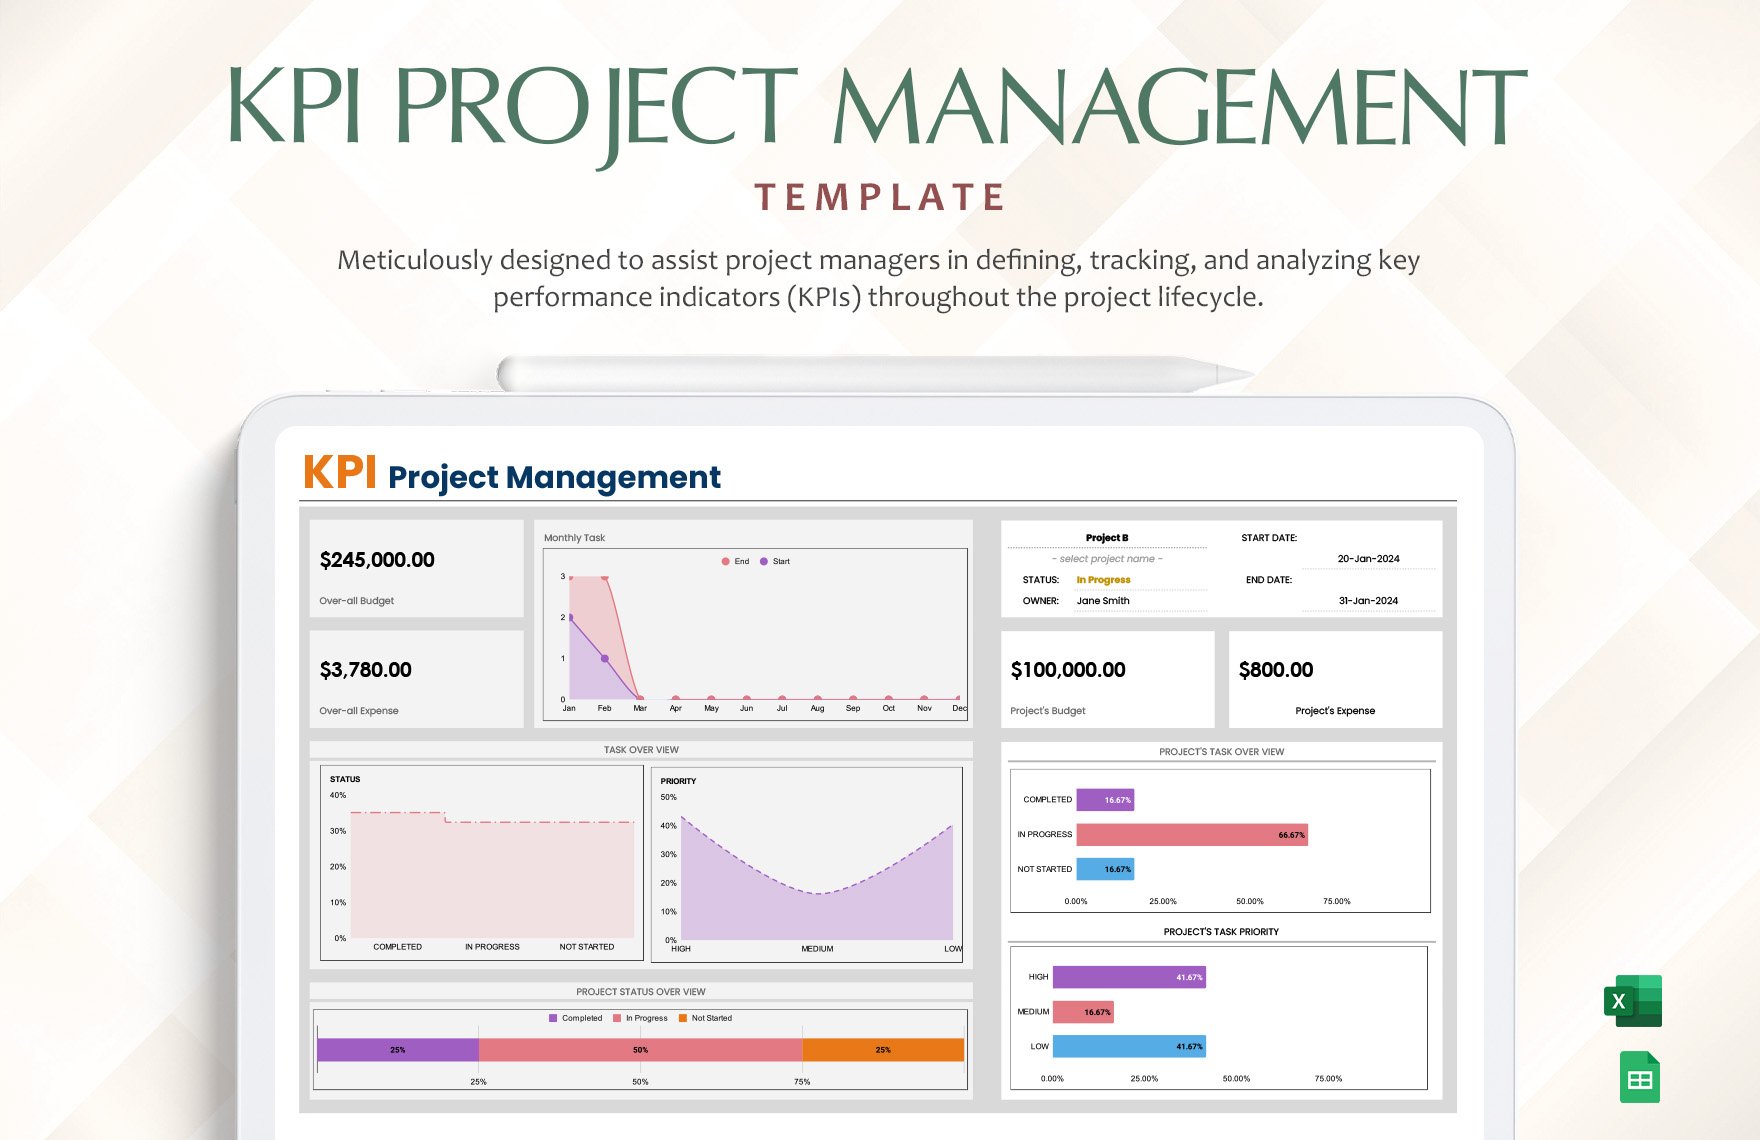 Project Management Report Template in Excel - FREE Download | Template.net